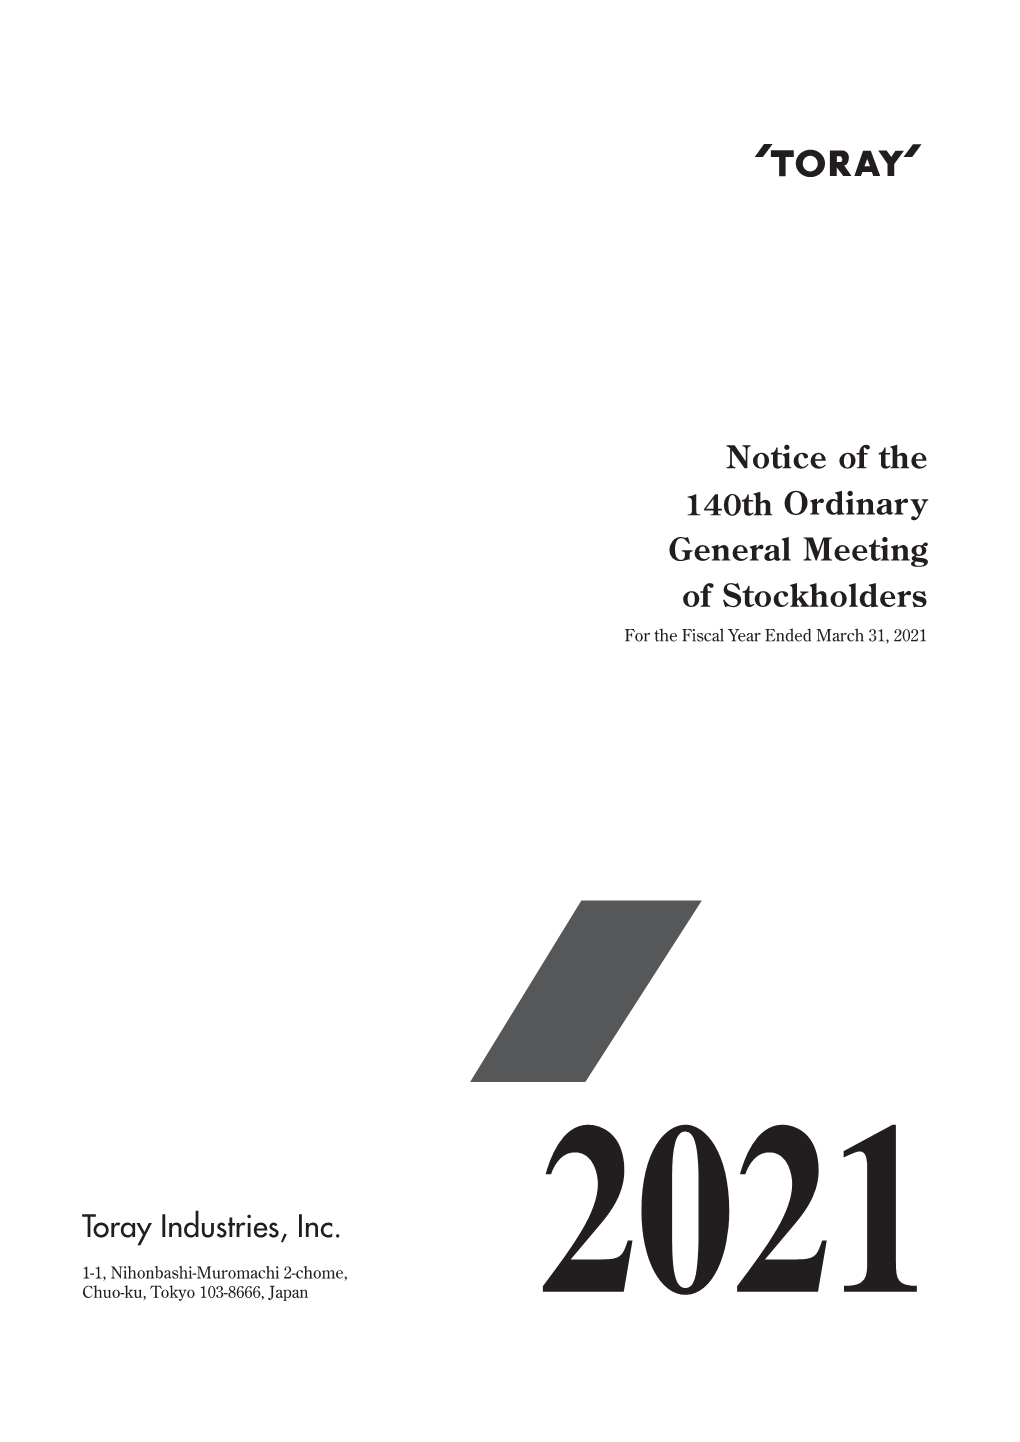 Notice of the 140Th Ordinary General Meeting of Stockholders June 2021